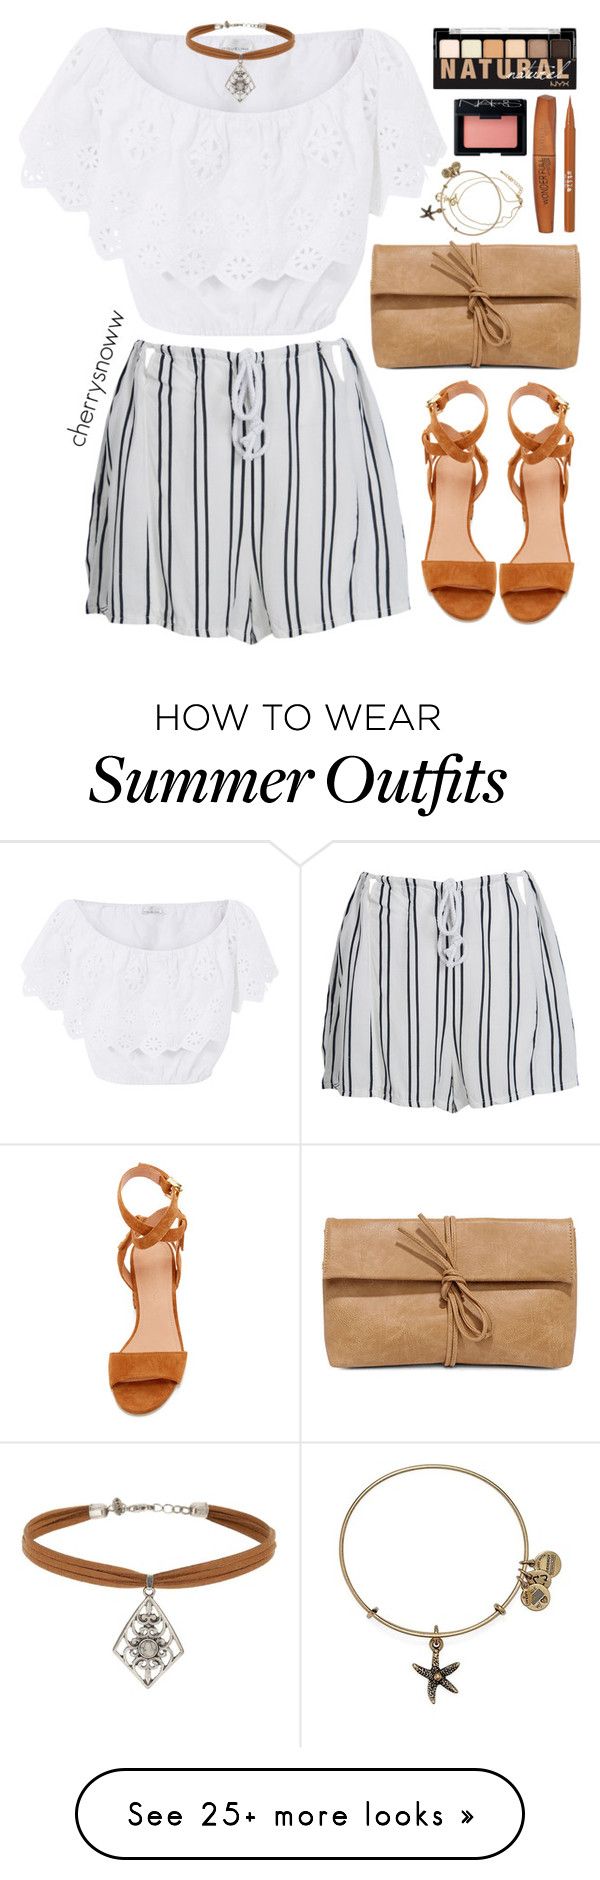 "Boho chic summer outfit" by cherrysnoww on Polyvore featuring WithChi...